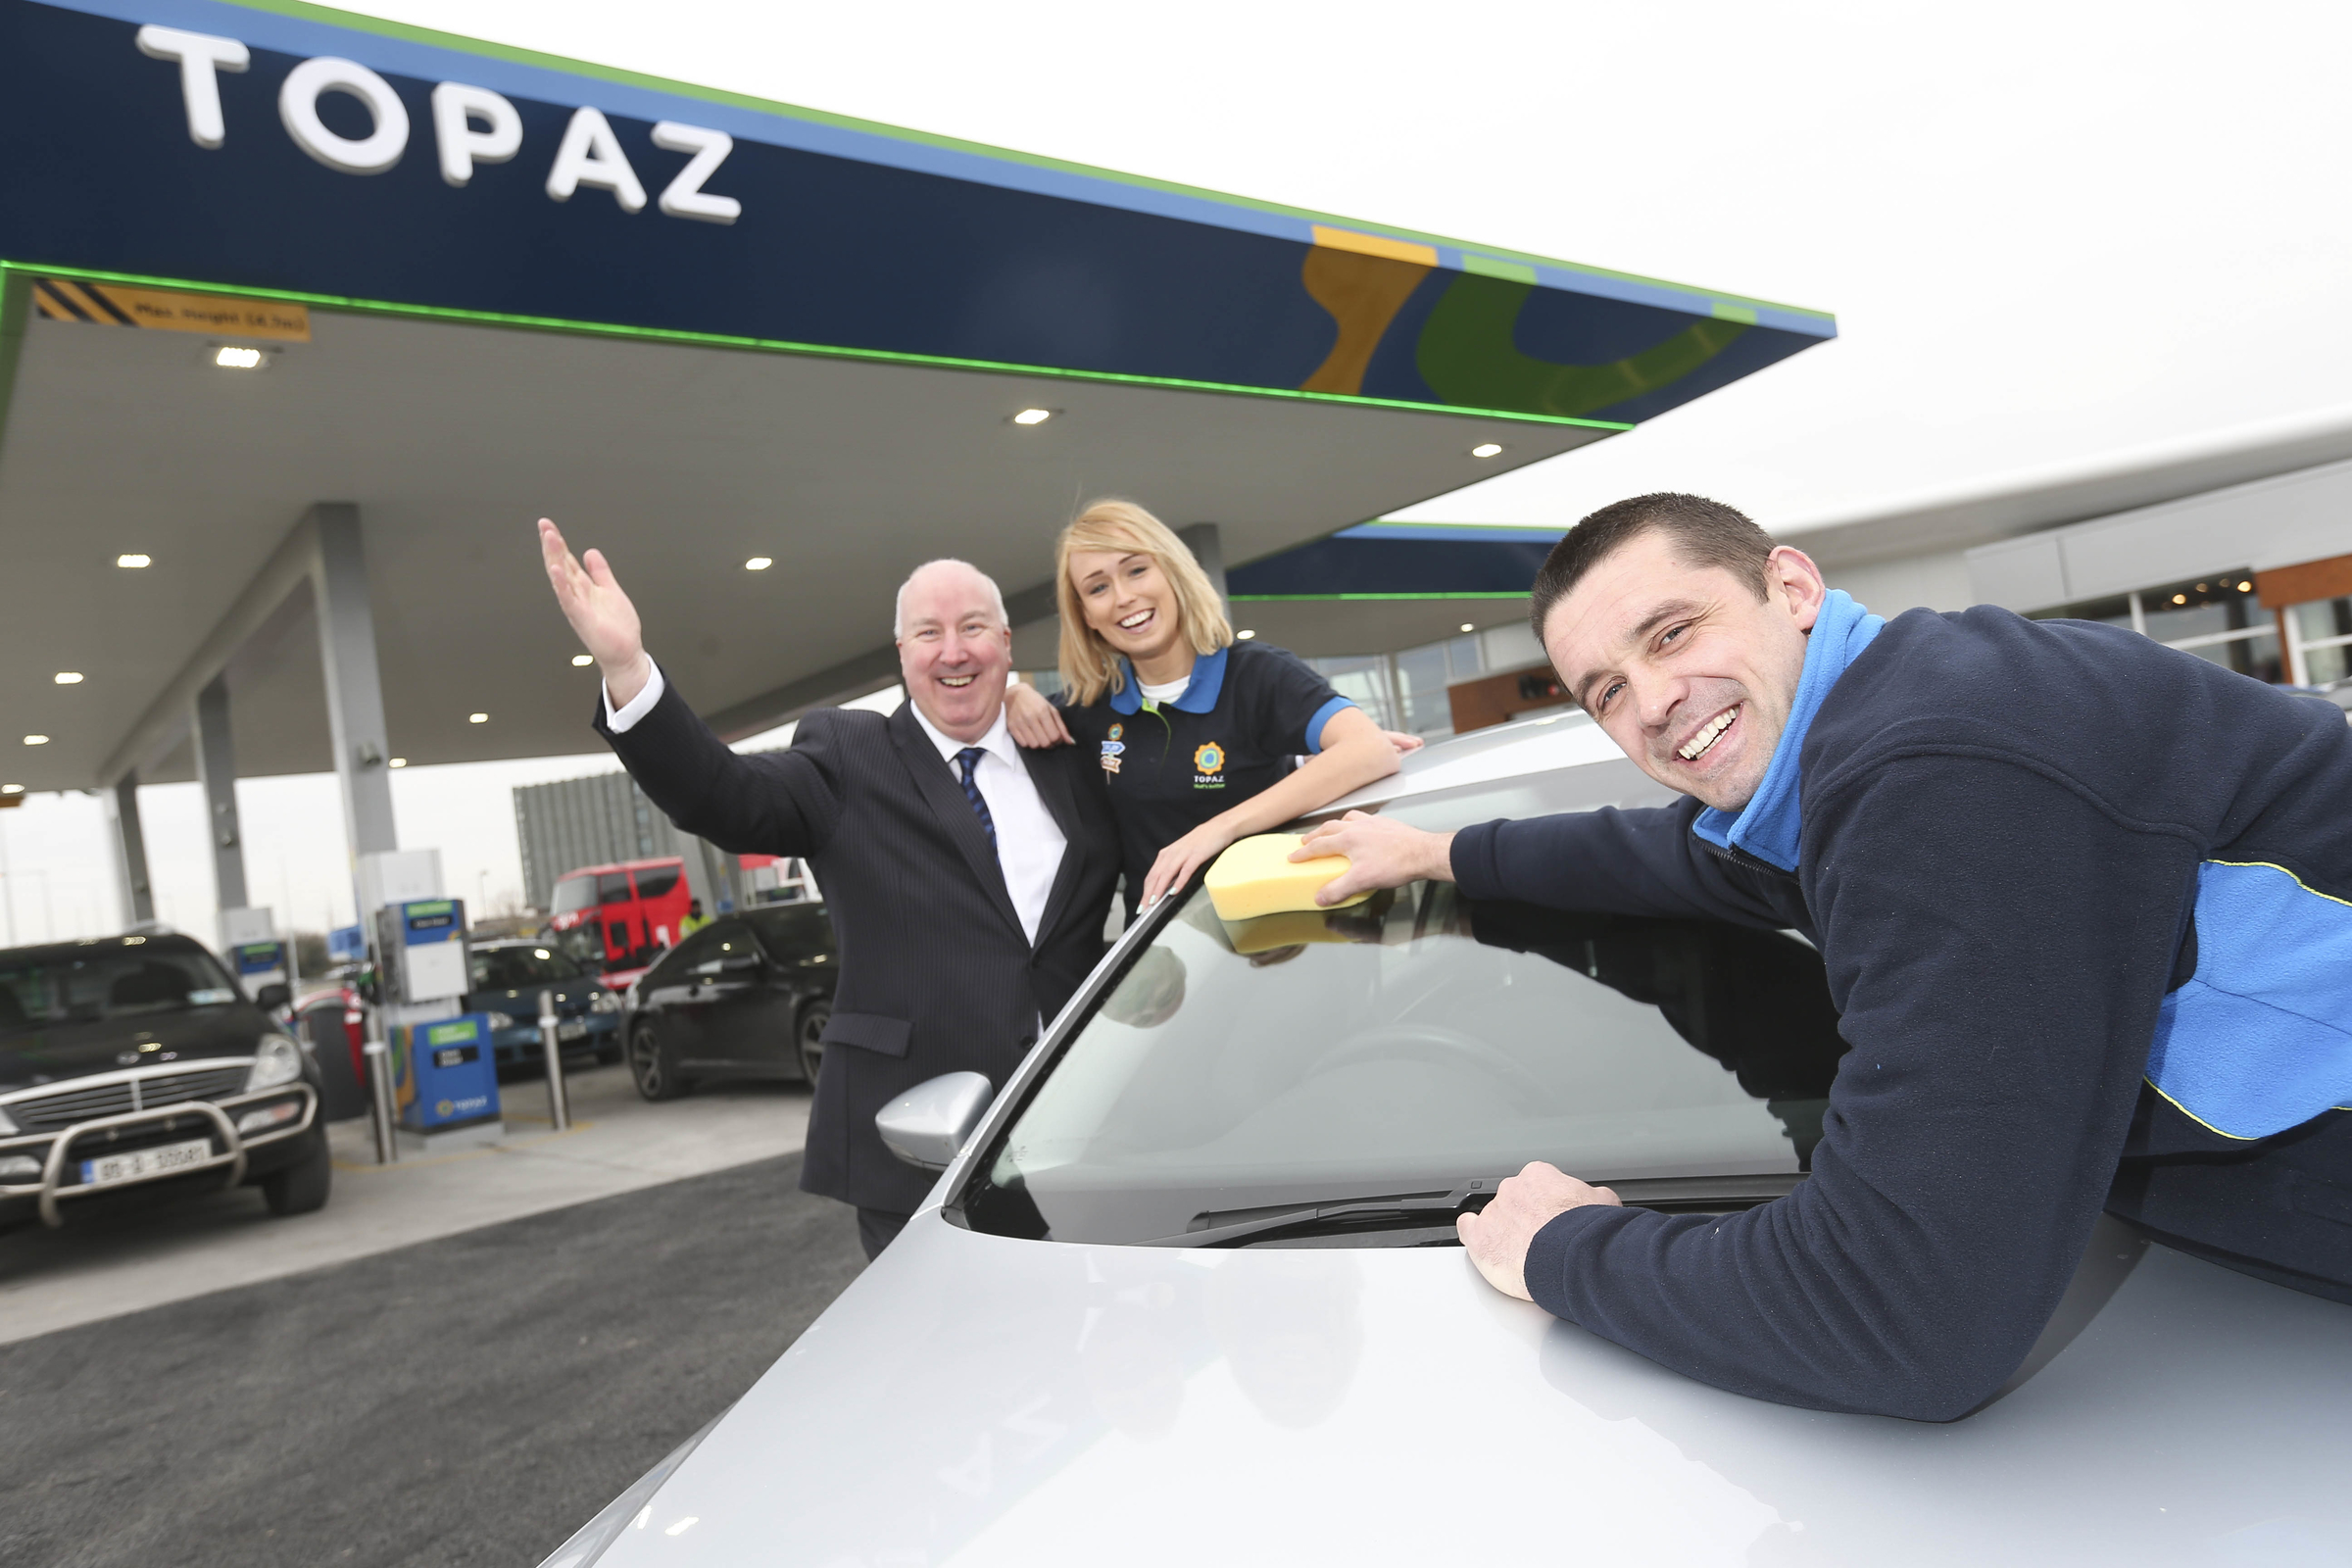 On hand to unveil the new Topaz service station at Northern Cross, Clonshaugh were Topaz ambassador and rugby star Alan Quinlan and Irish footballer and FIFA Puskas Award finalist Stephanie Roche alongside Paul Candon, group marketing director at Topaz